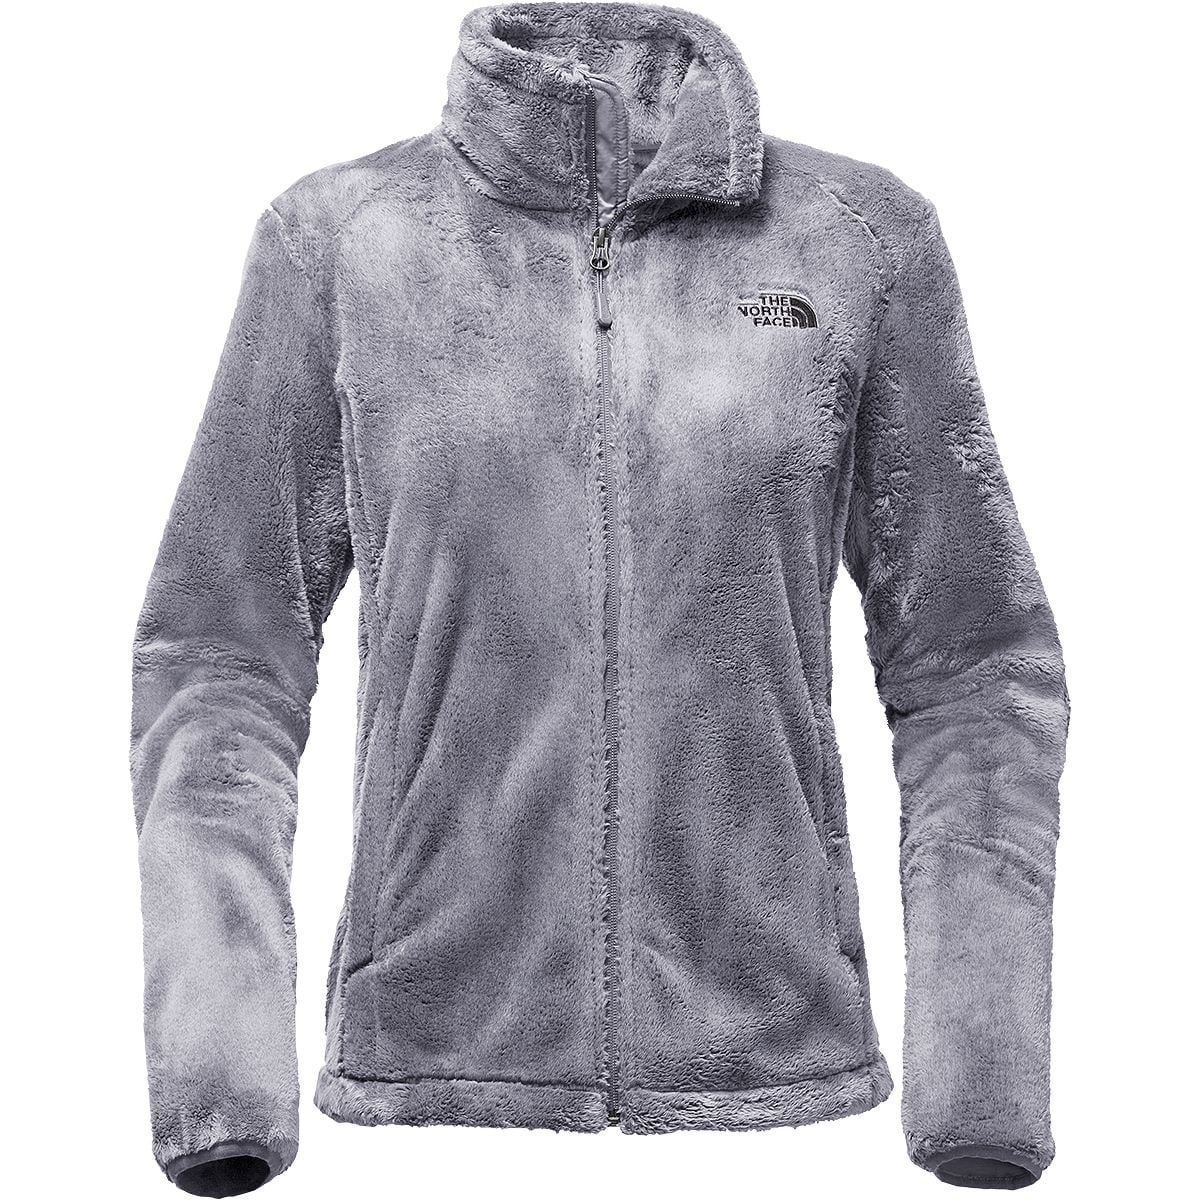 the north face osito 2 fleece jacket for ladies